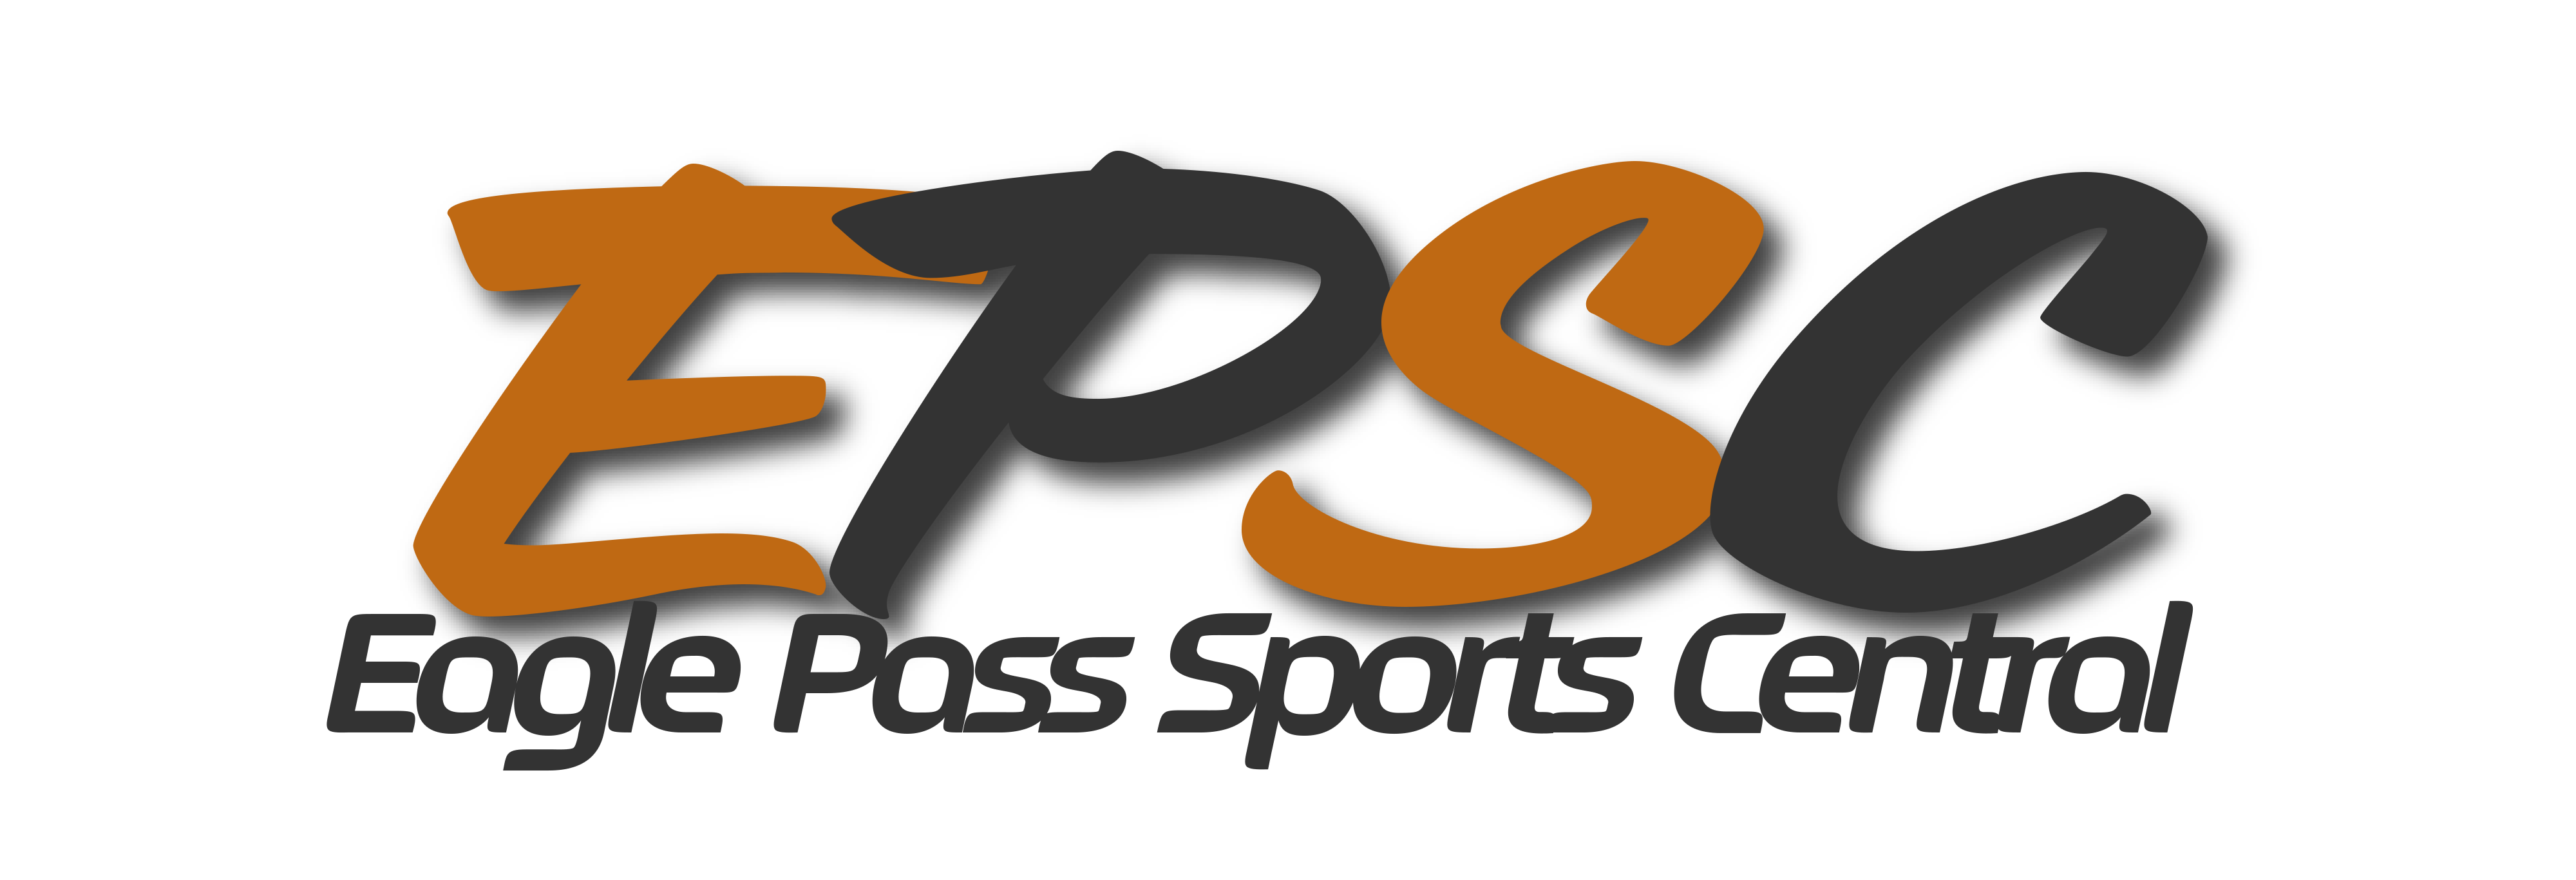 Eagle Pass Sports Central